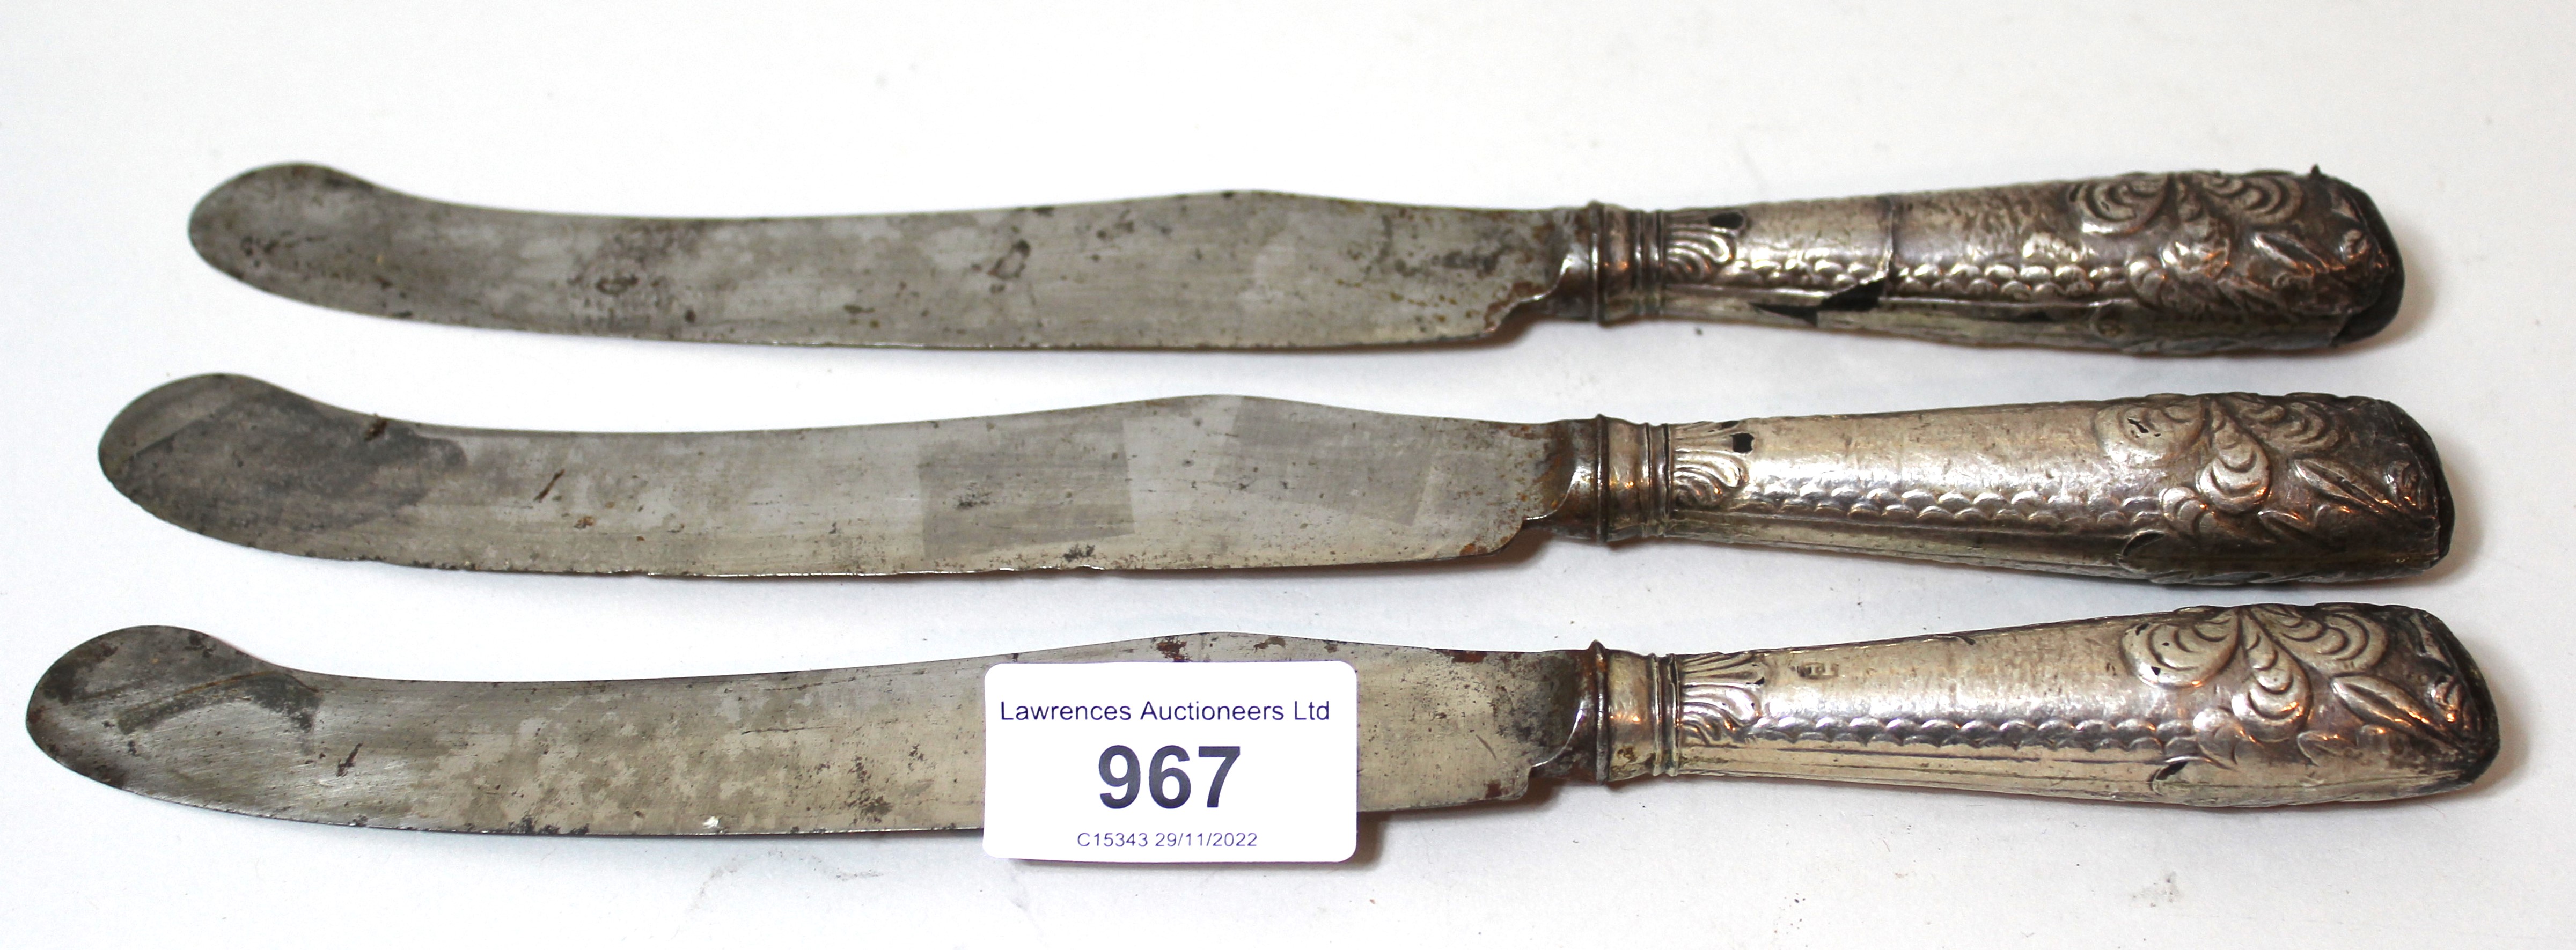 Group of three George III steel bladed knives with silver covered handles (at fault)